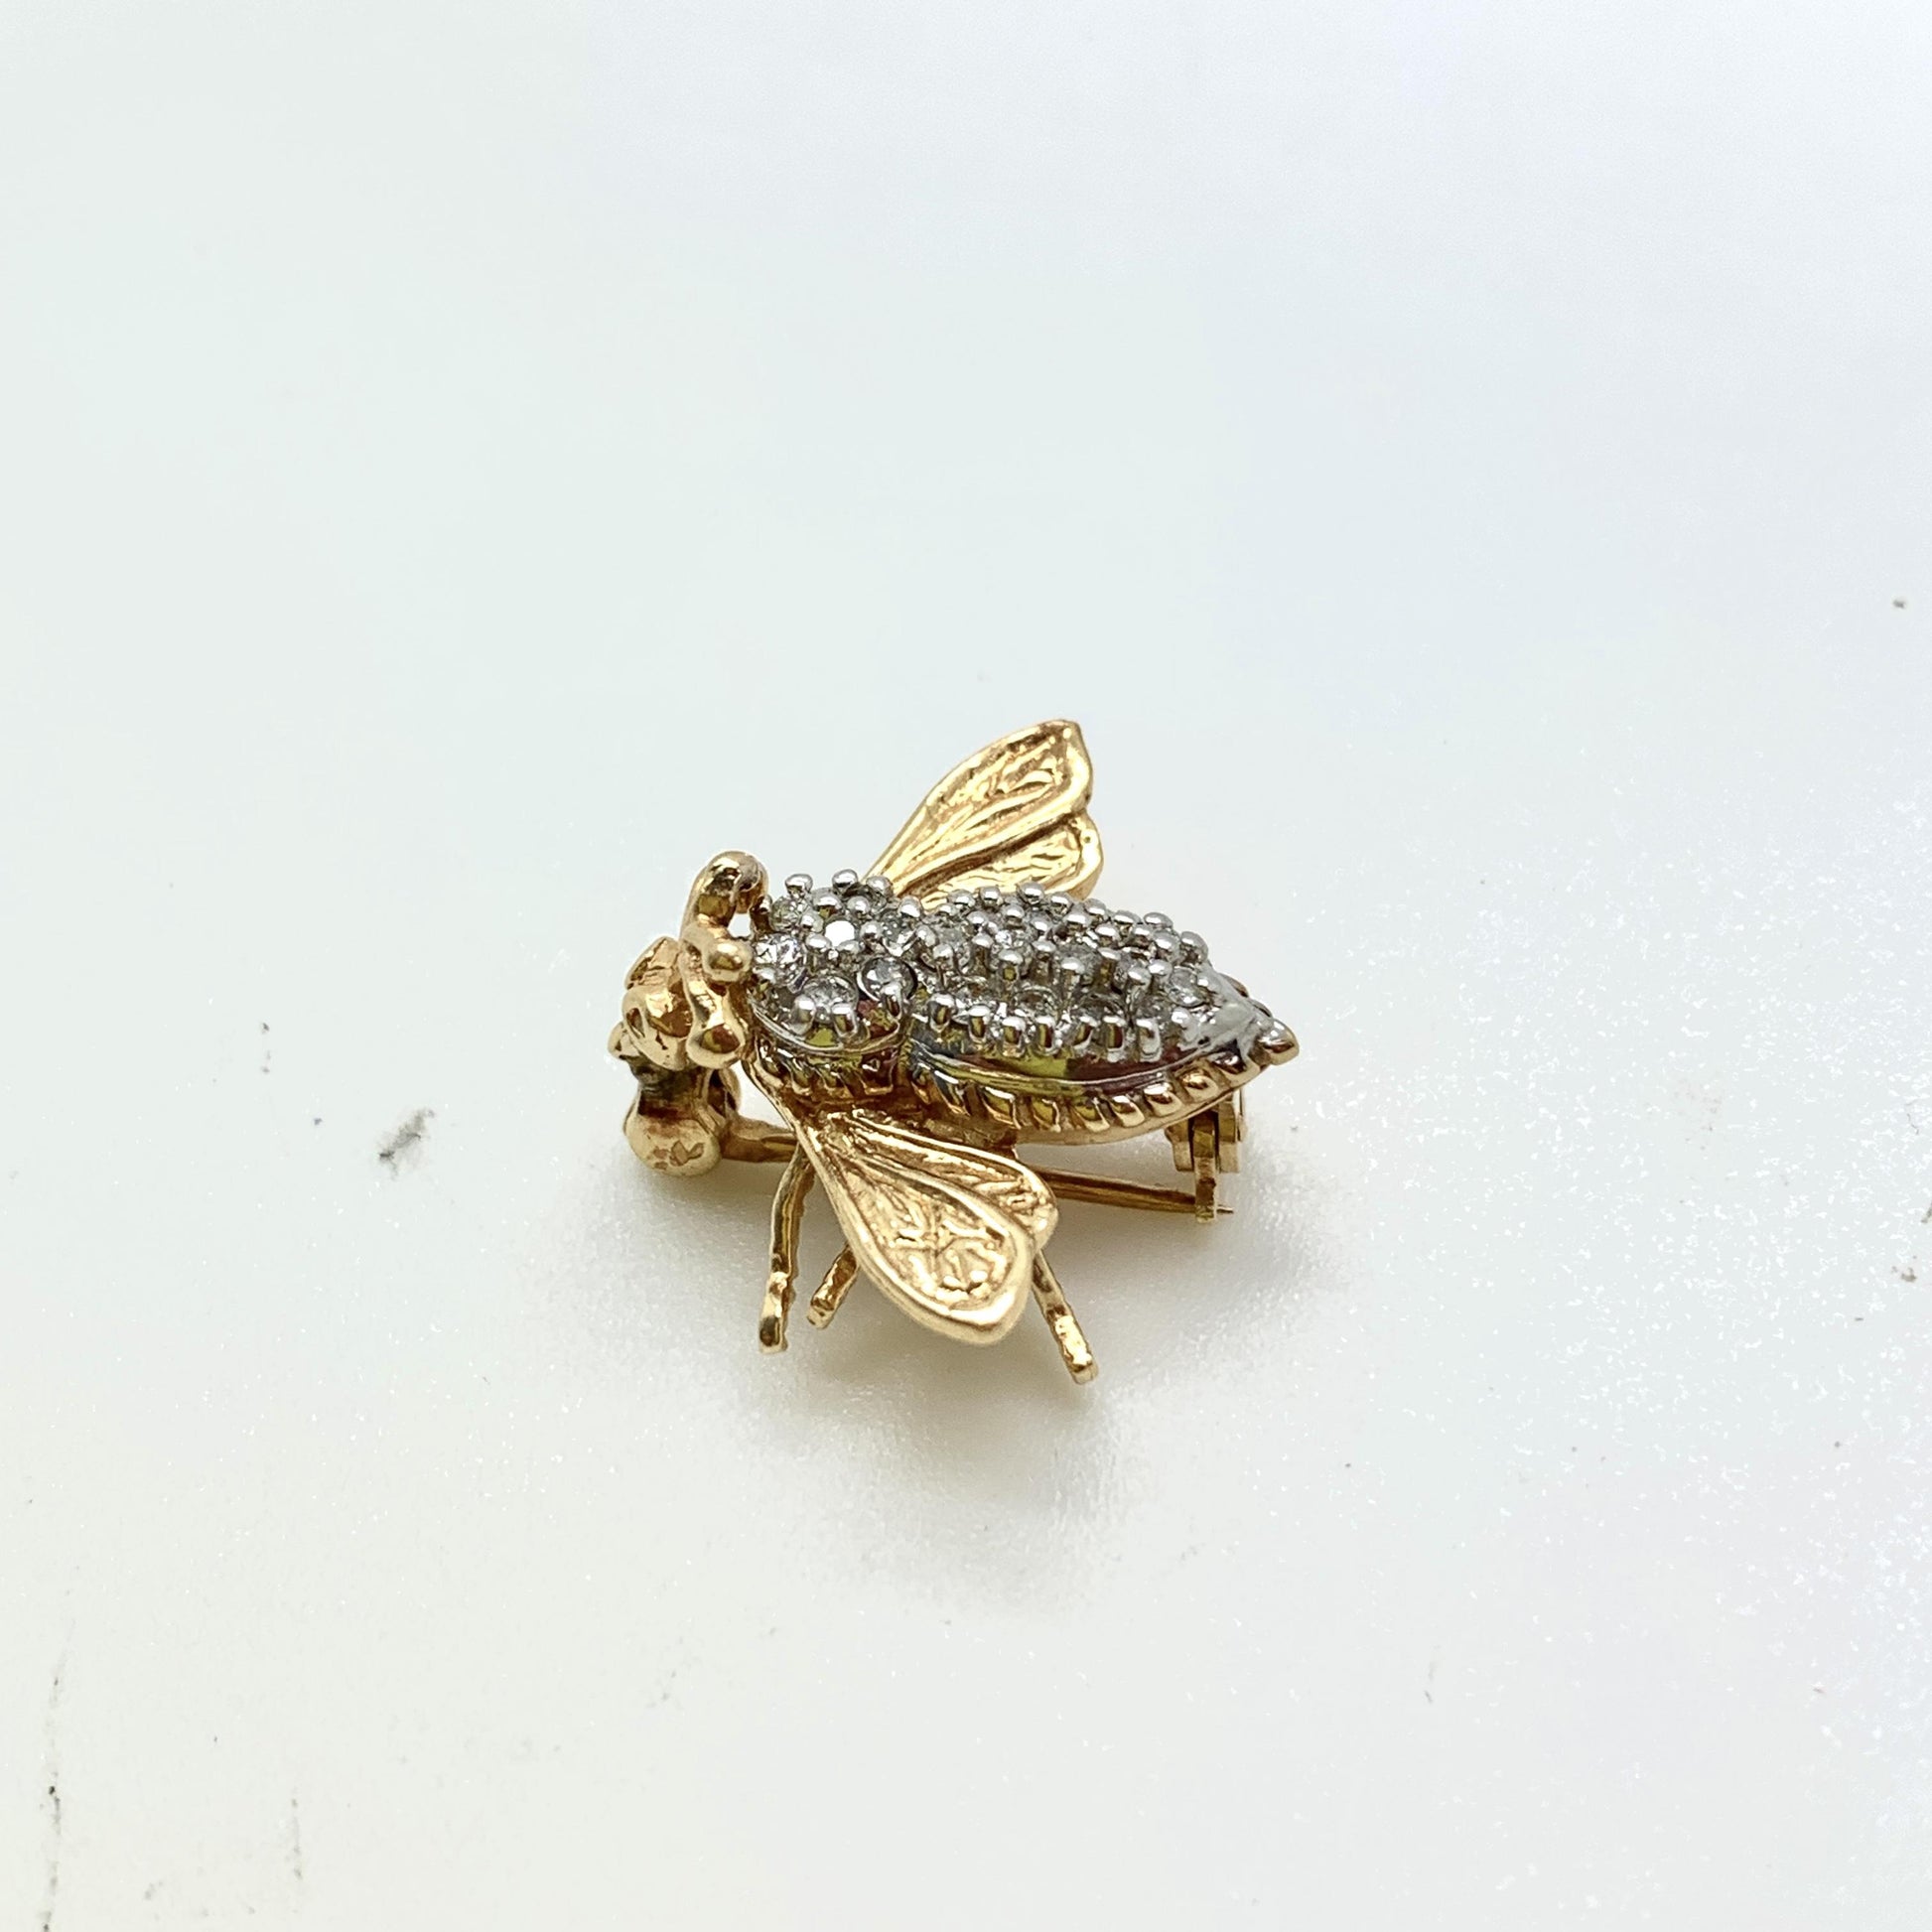 0.27 cttw Queen Honey Bee Brooch Pin 14K Gold Pave Diamonds by EMA